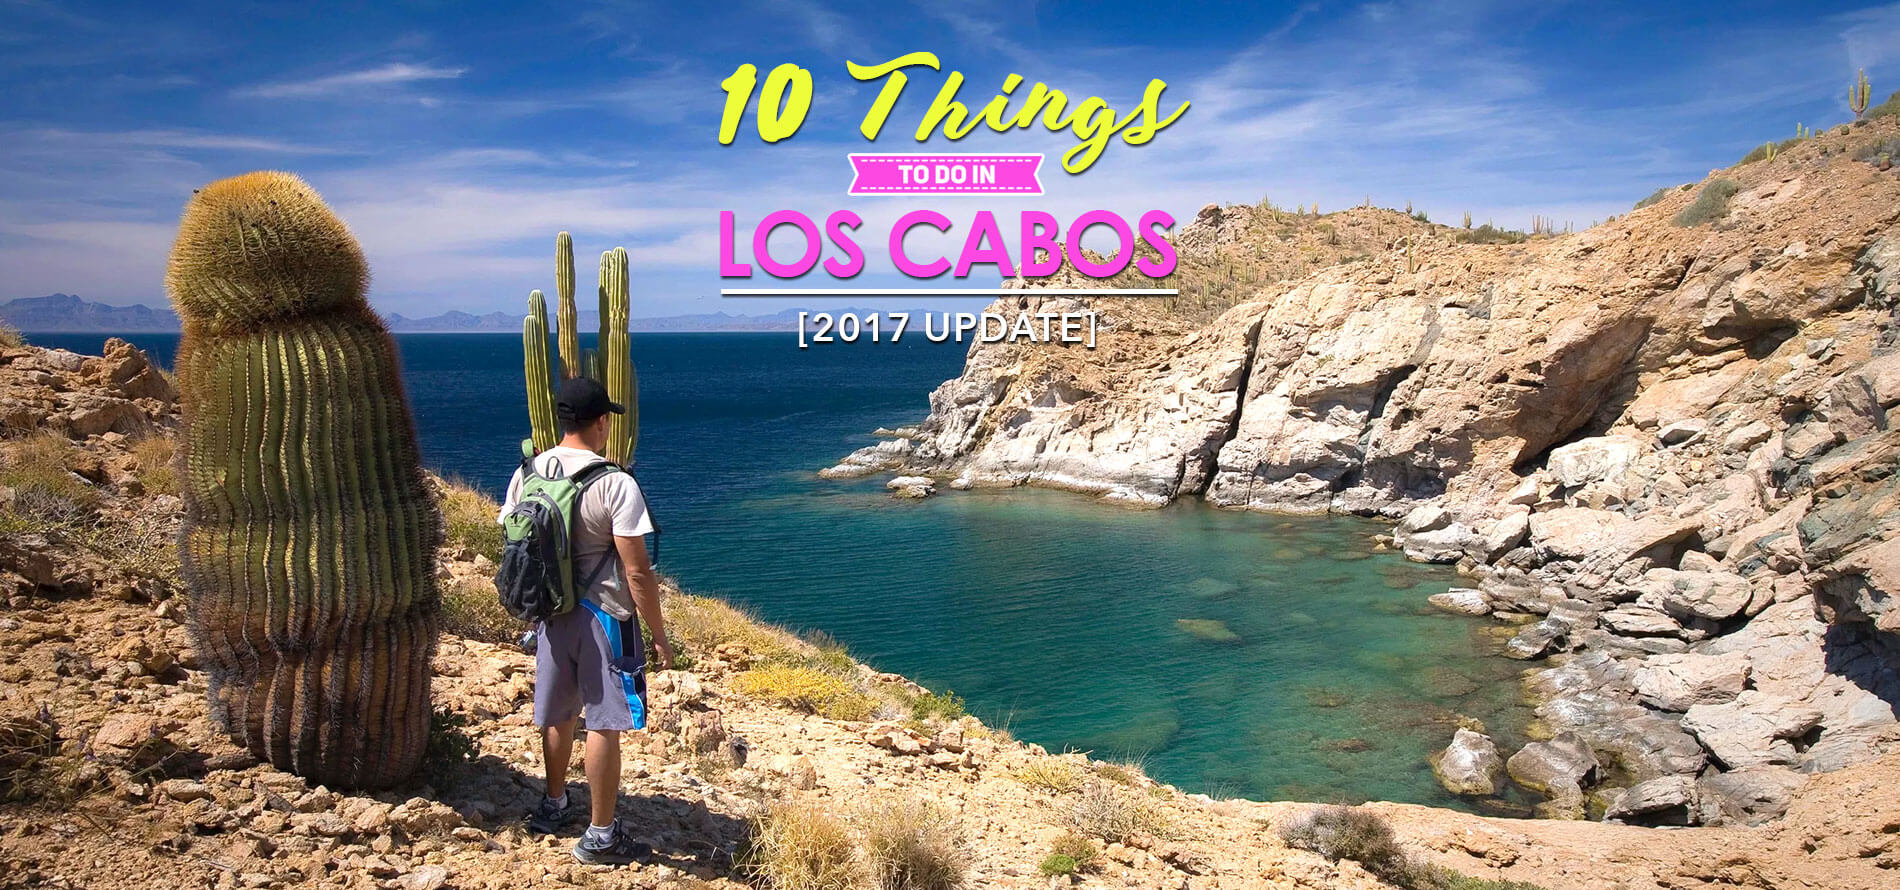 Top 10 things to do in los cabos